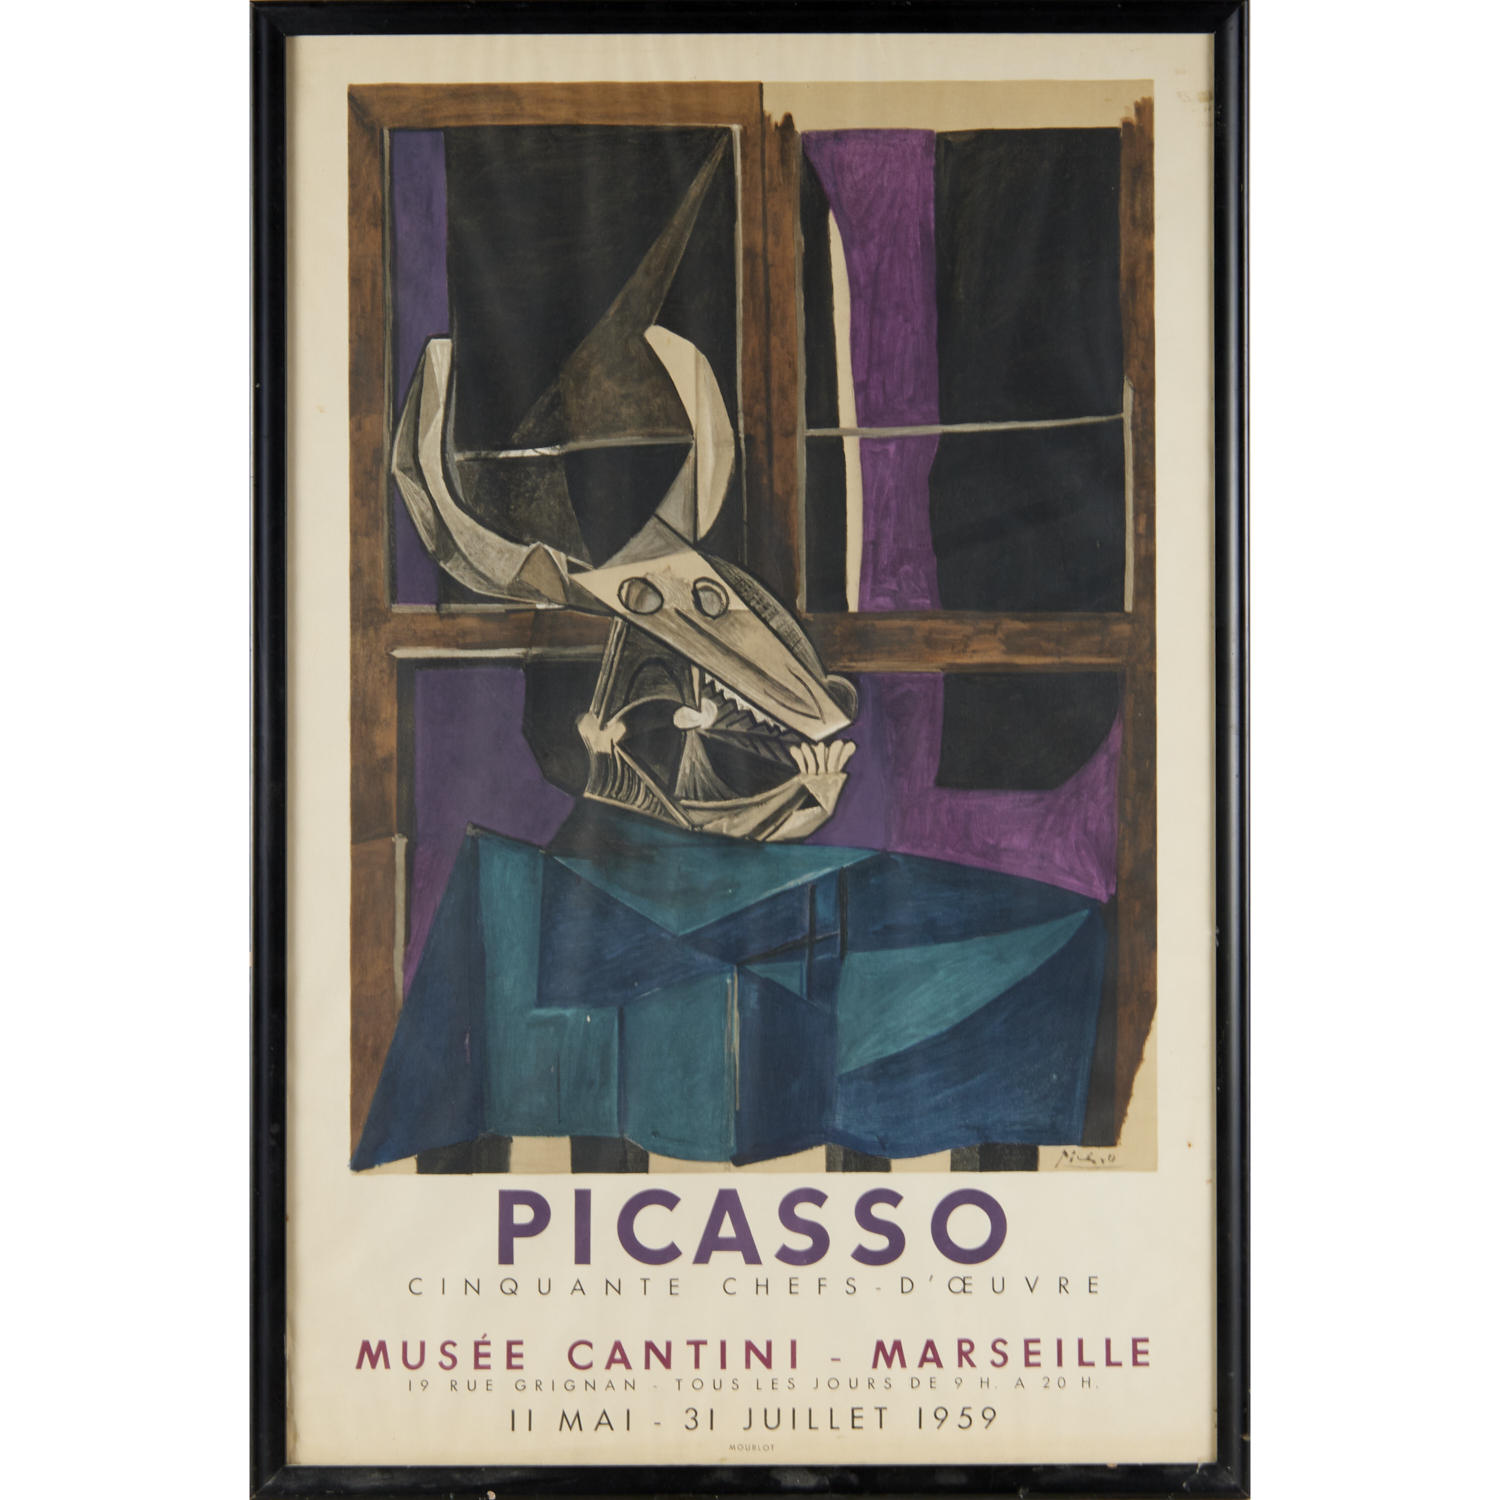 PABLO PICASSO, LITHOGRAPHIC POSTER,